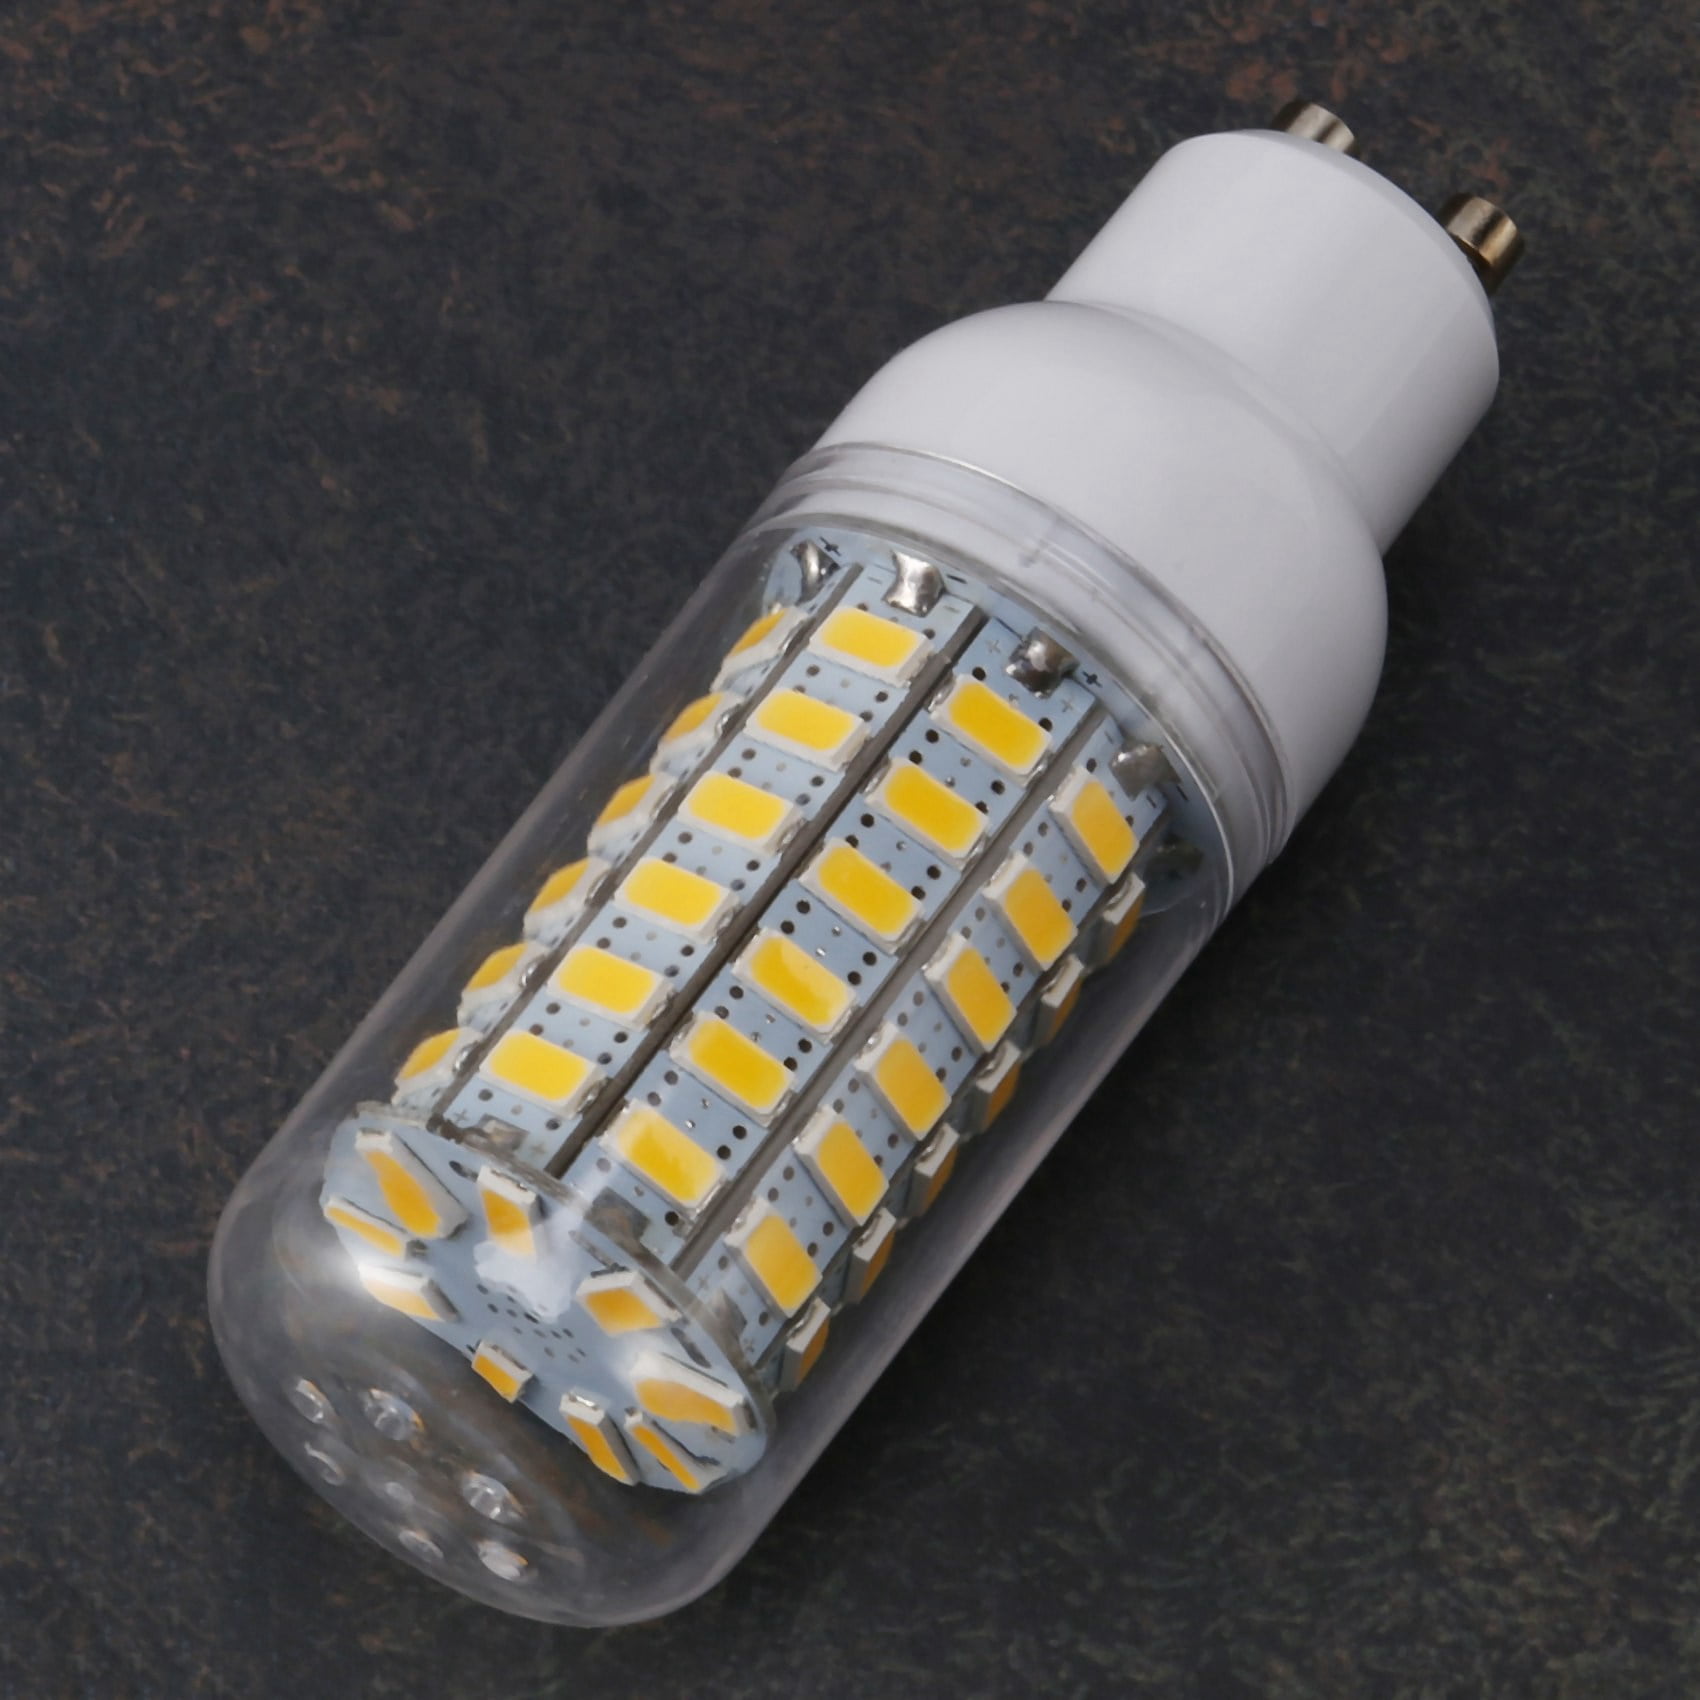 MR16 SMD5050 5730 2.4G 4W RGBW LED Bulb Spot Light Lamp With 2.4G RGBW Remote 